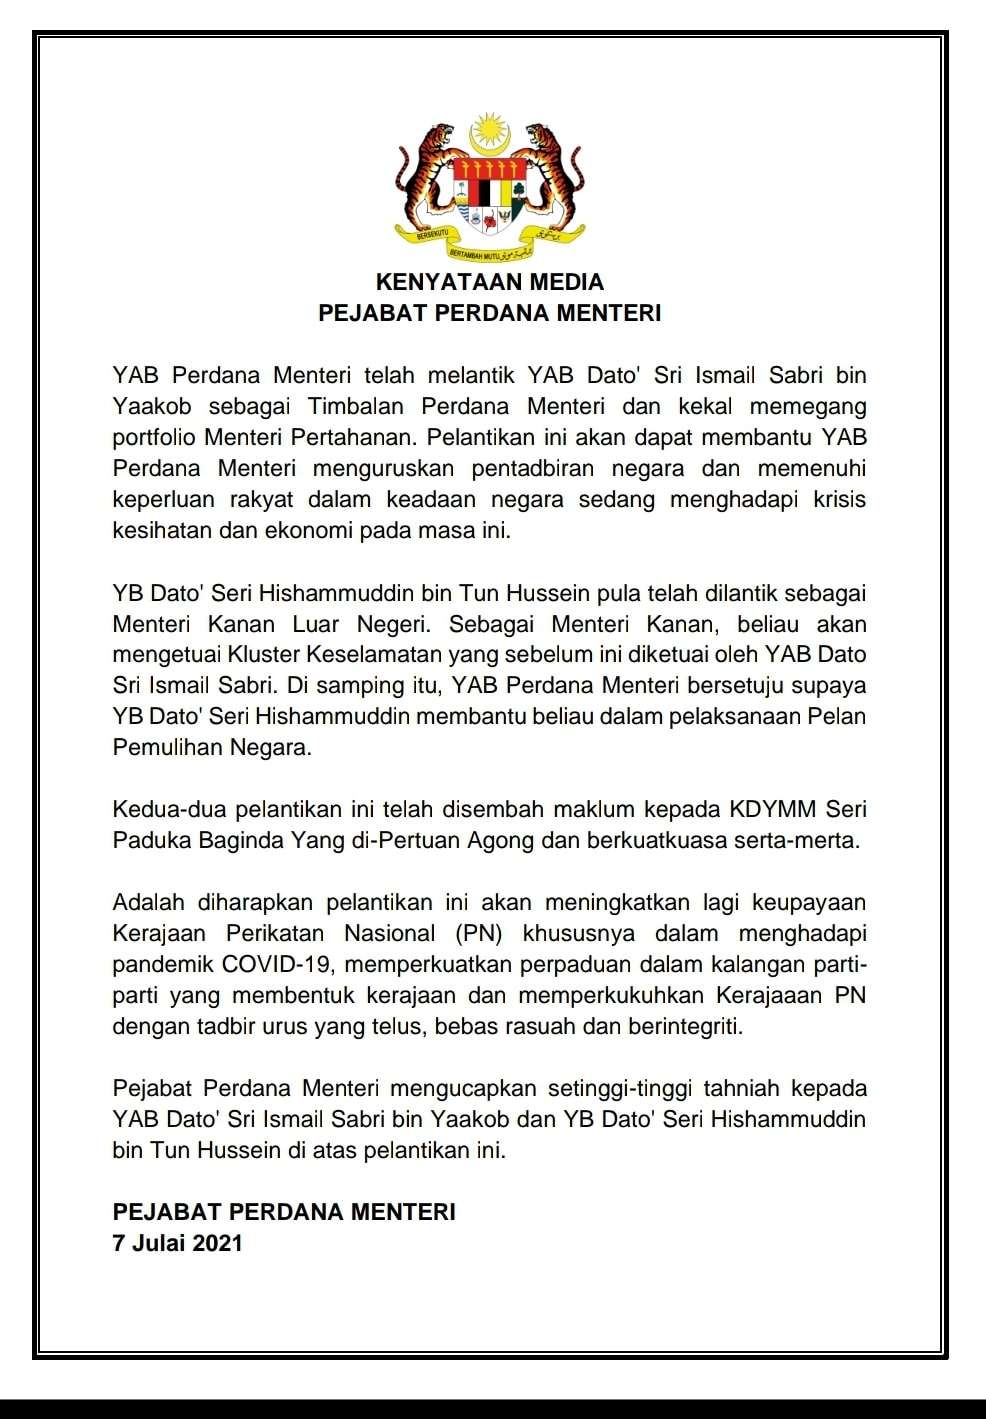 Prime Minister Muhiyiddin Yassin statement appointing Ismail Sabri as Deputy Prime Minister and Hishammuddin Hussein as Senior Minister